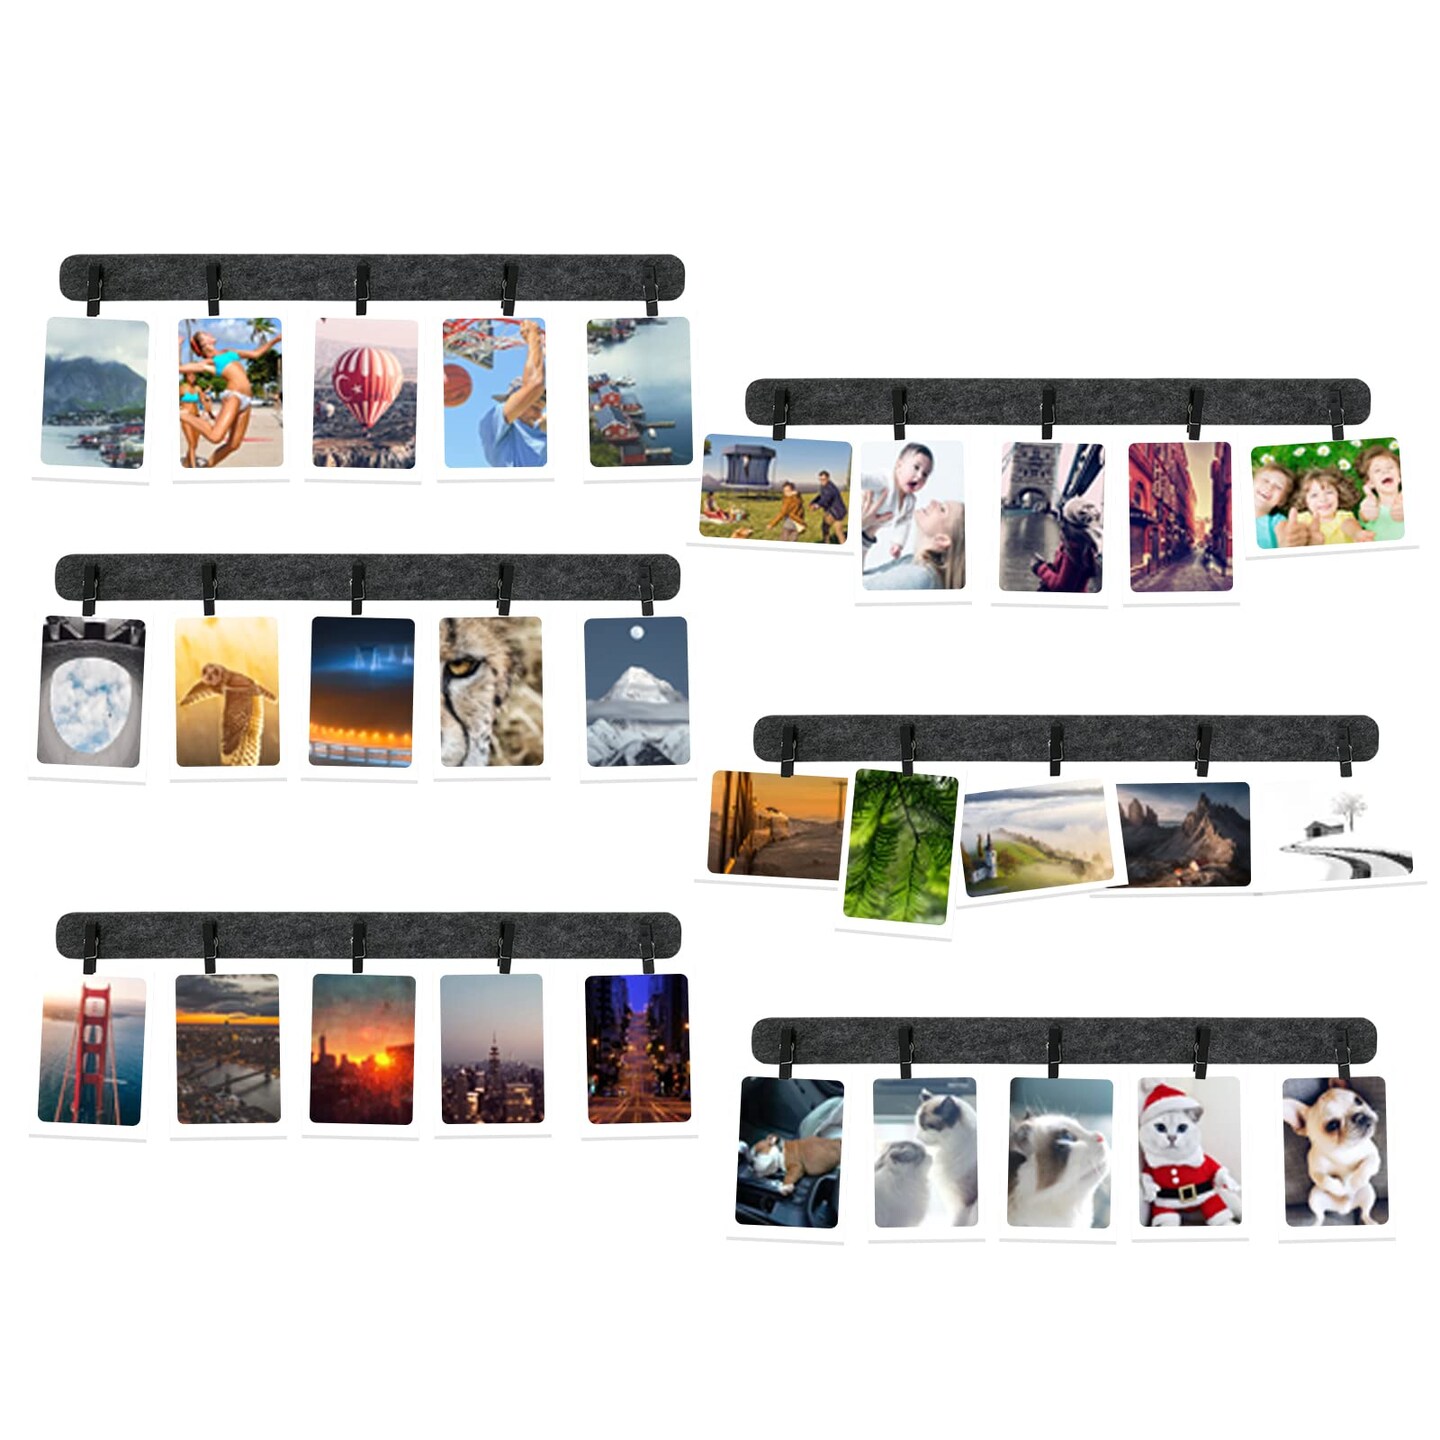 noonebutyou Picture Frames Collage Wall Decor, 6 Pcs Black Felt Lightweight Bulletin Board Strips, Photo Wall Collage Kit with 30 Clips for Photo Display, Notes, Schedules, Announcements